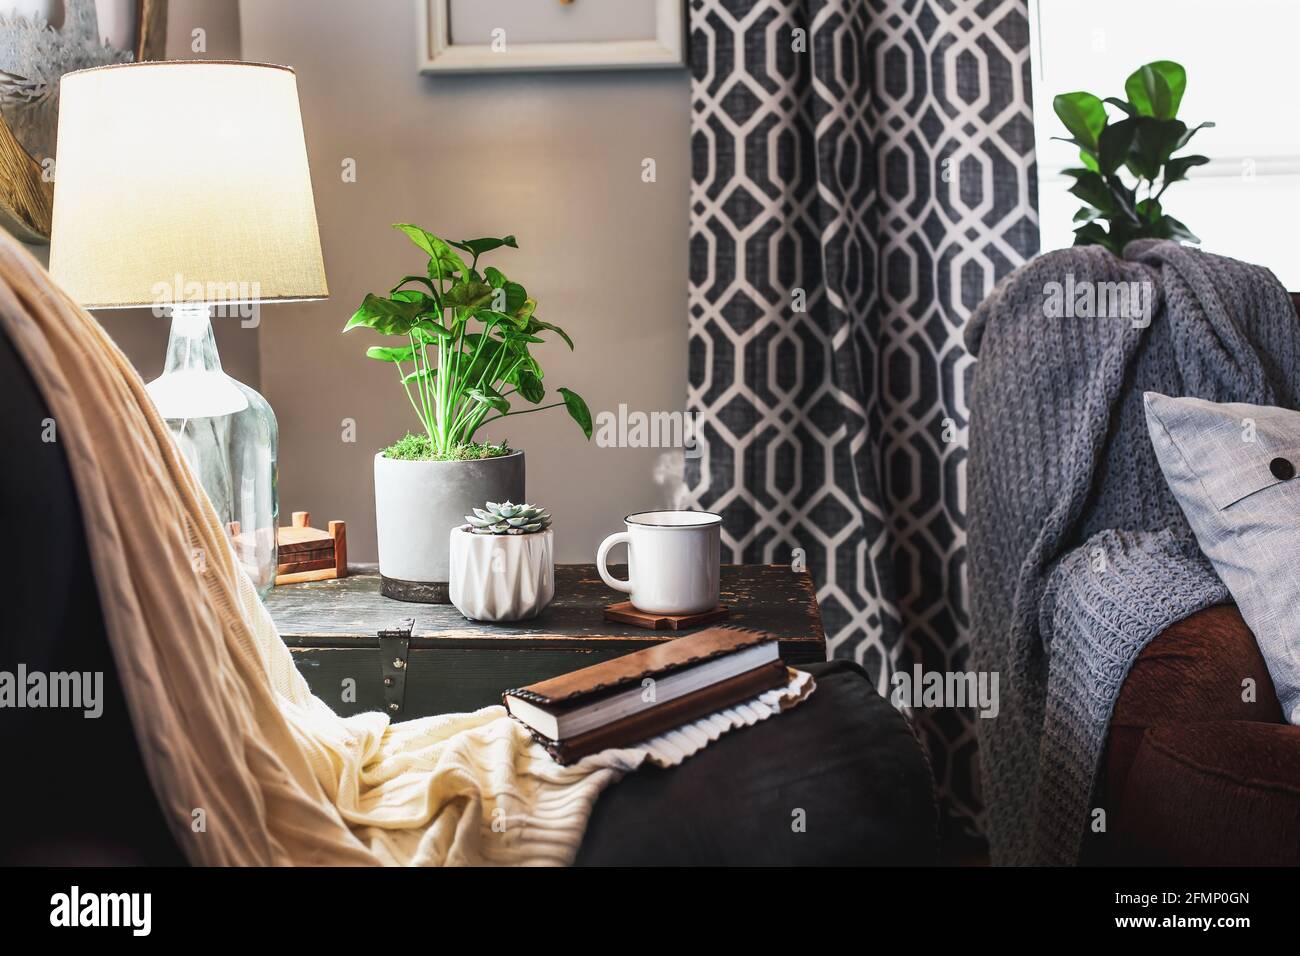 Cozy setting of a hot, steaming cup of coffee sitting on a vintage chest with houseplants and lamp in a farmhouse style living room. Stock Photo